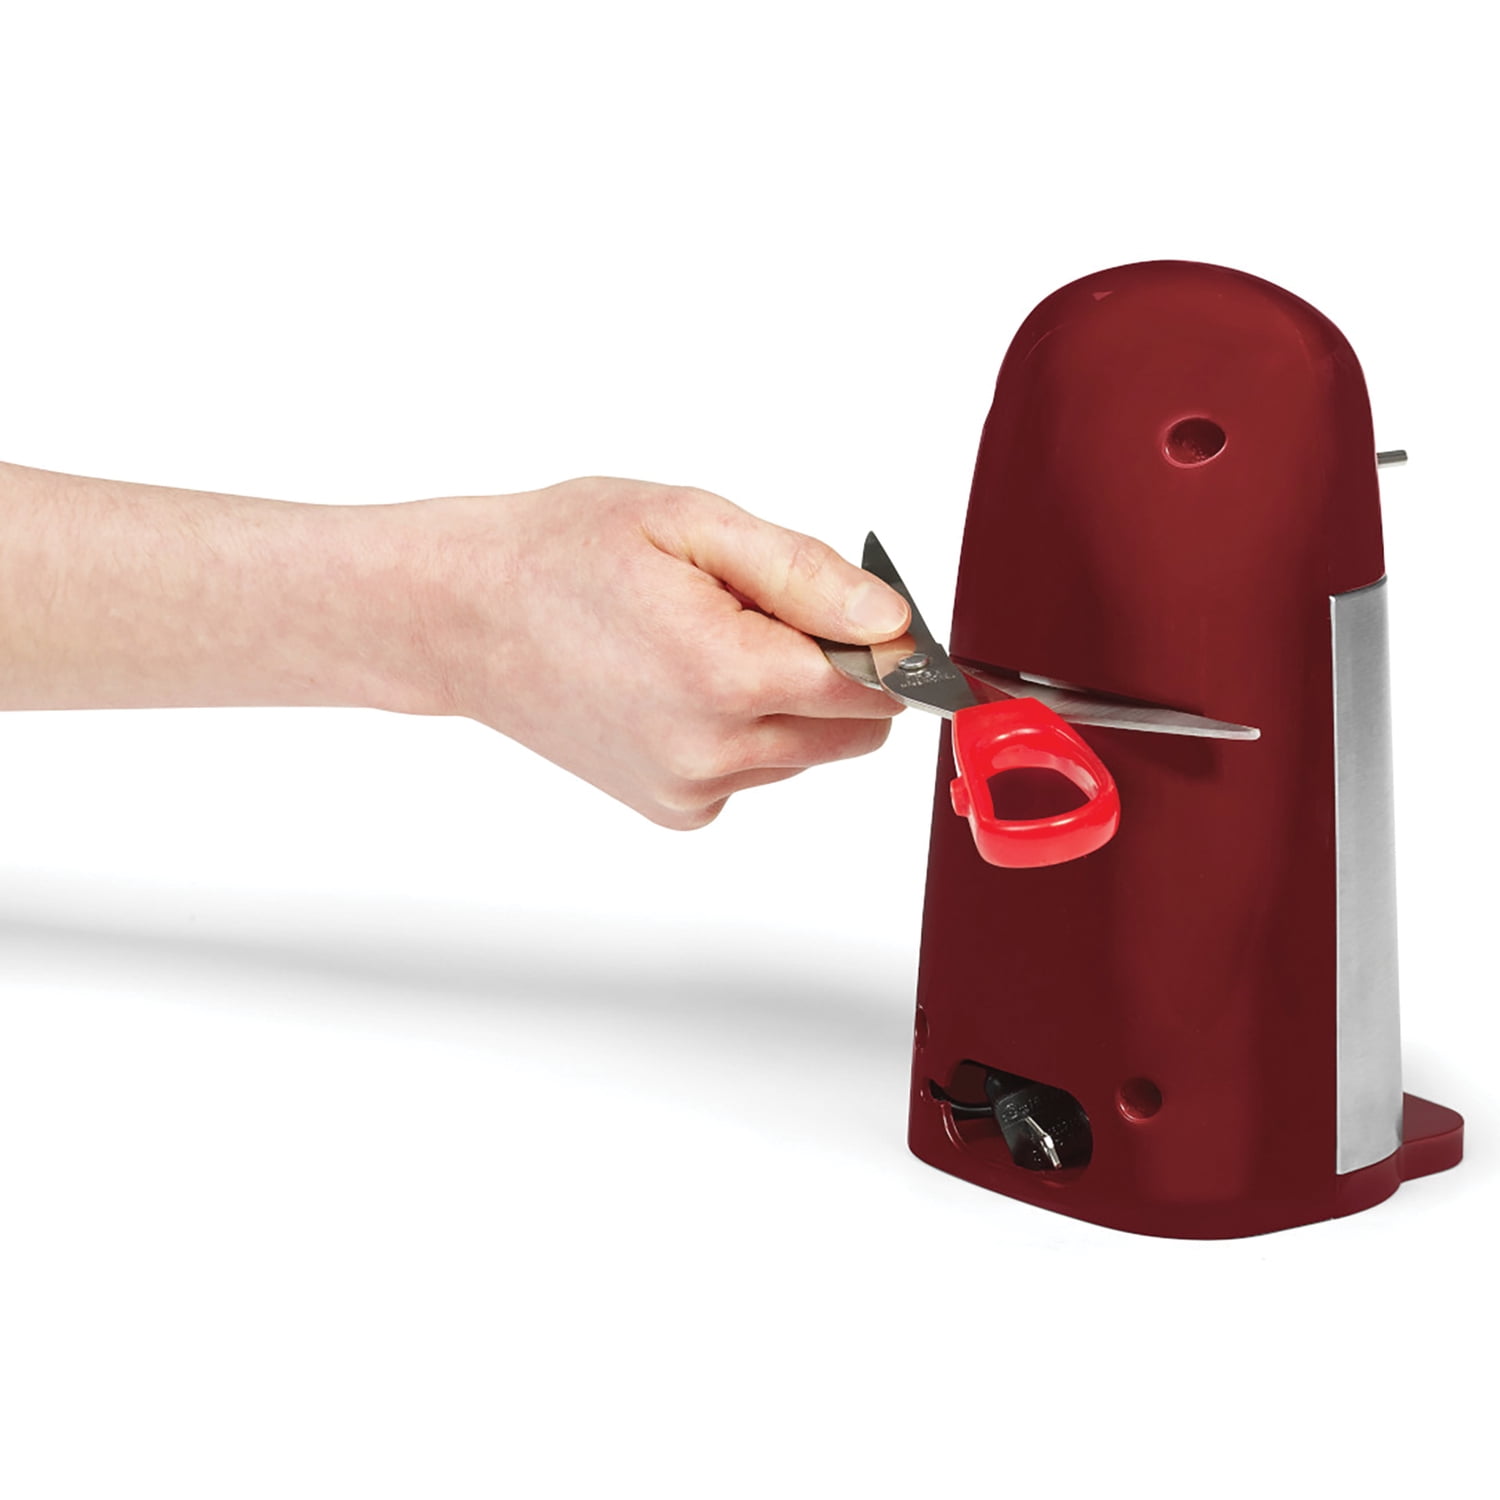 POHL SCHMITT Electric Can Opener Review, Test